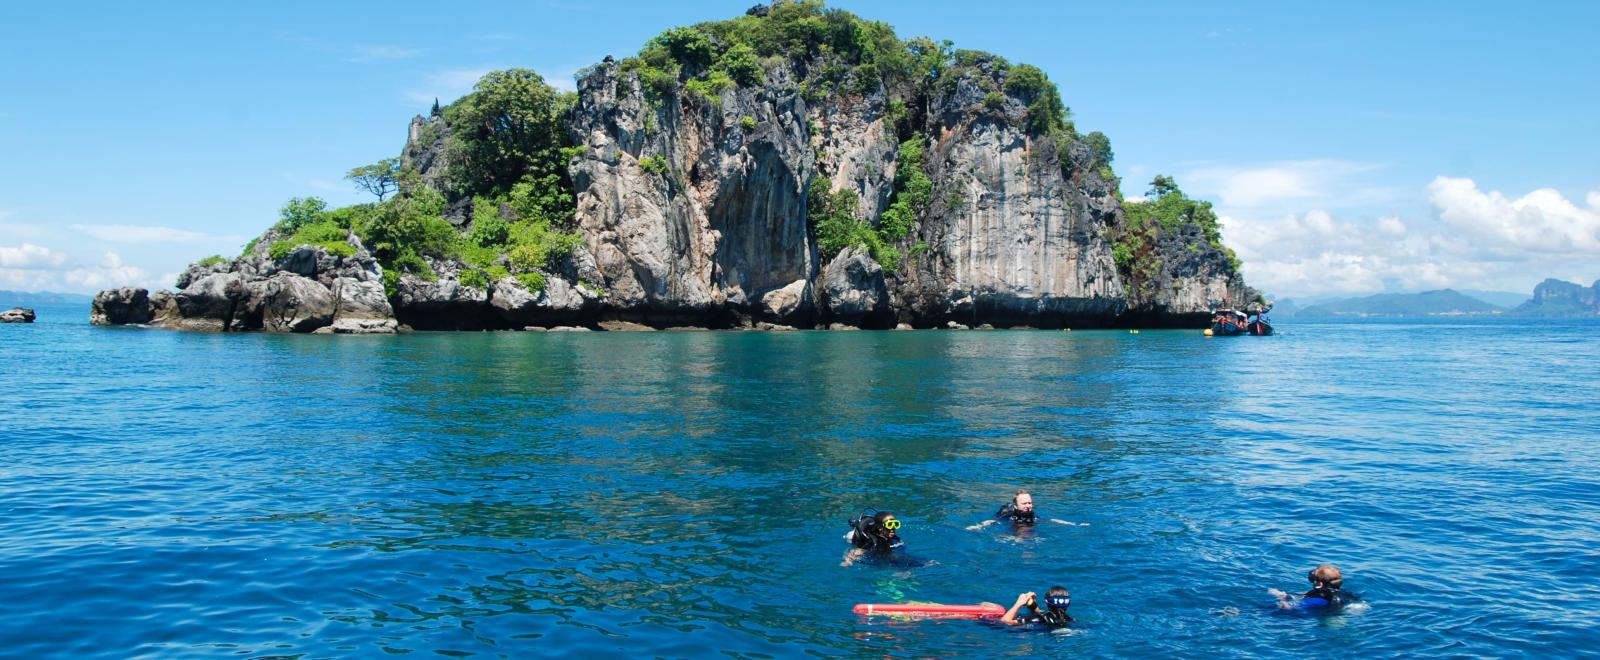 Projects Abroad staff preparing for a dive in Thailand on a Marine Conservation Project